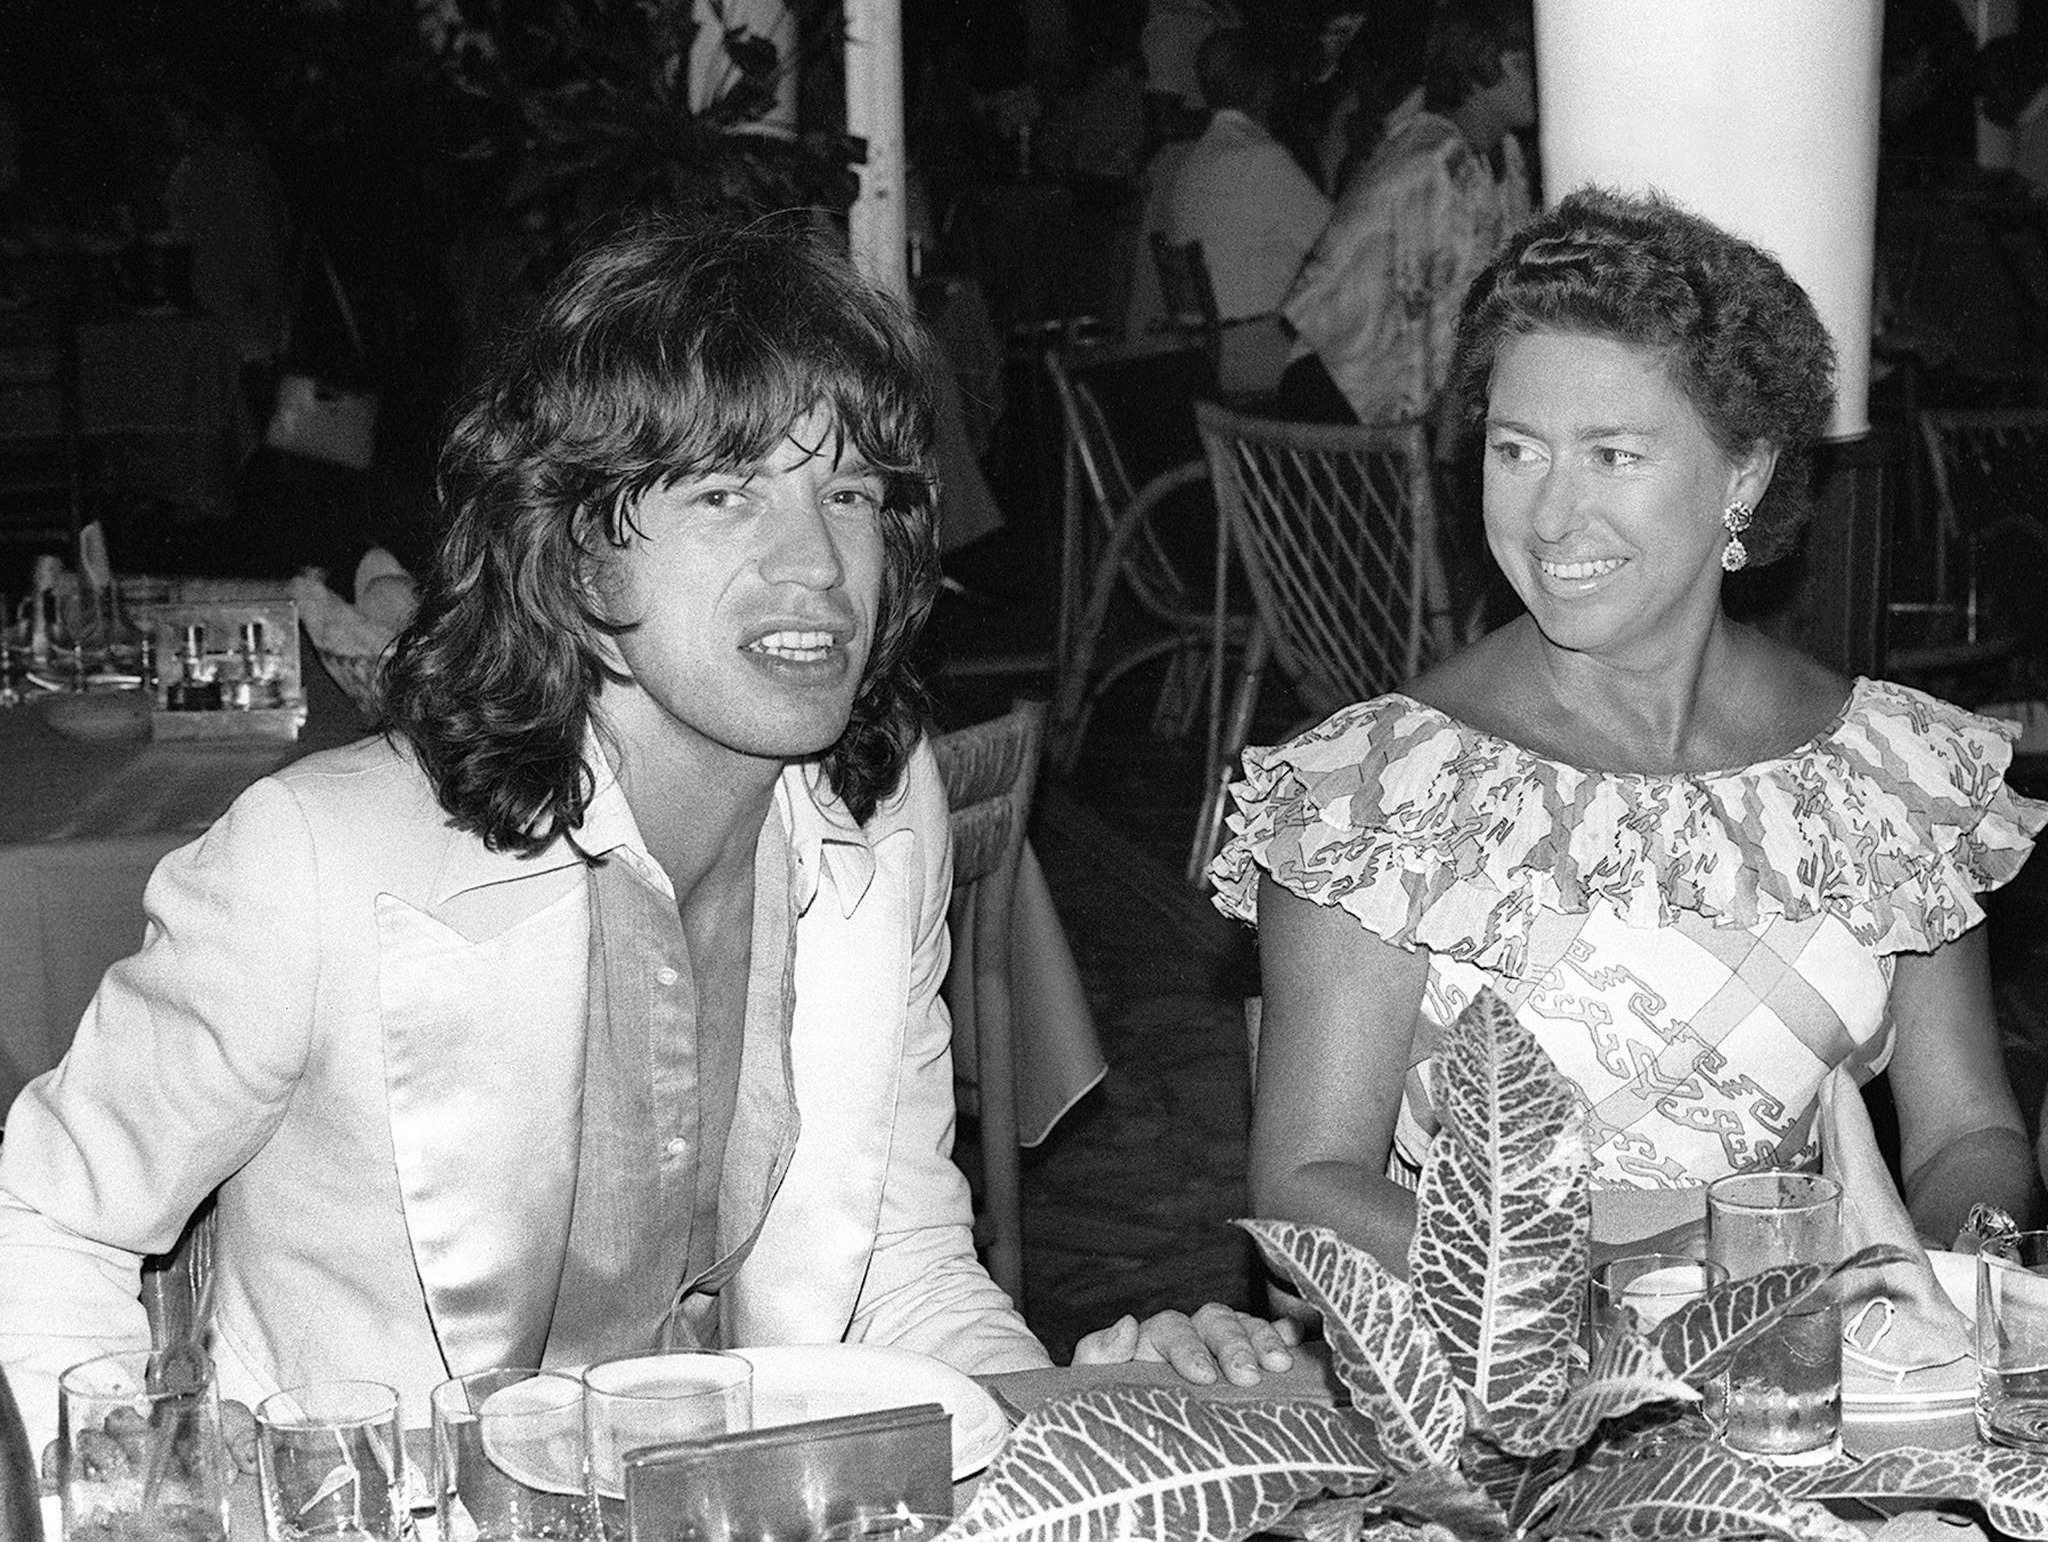 She chats with Rolling Stones star Mick Jagger in a restaurant in 1976